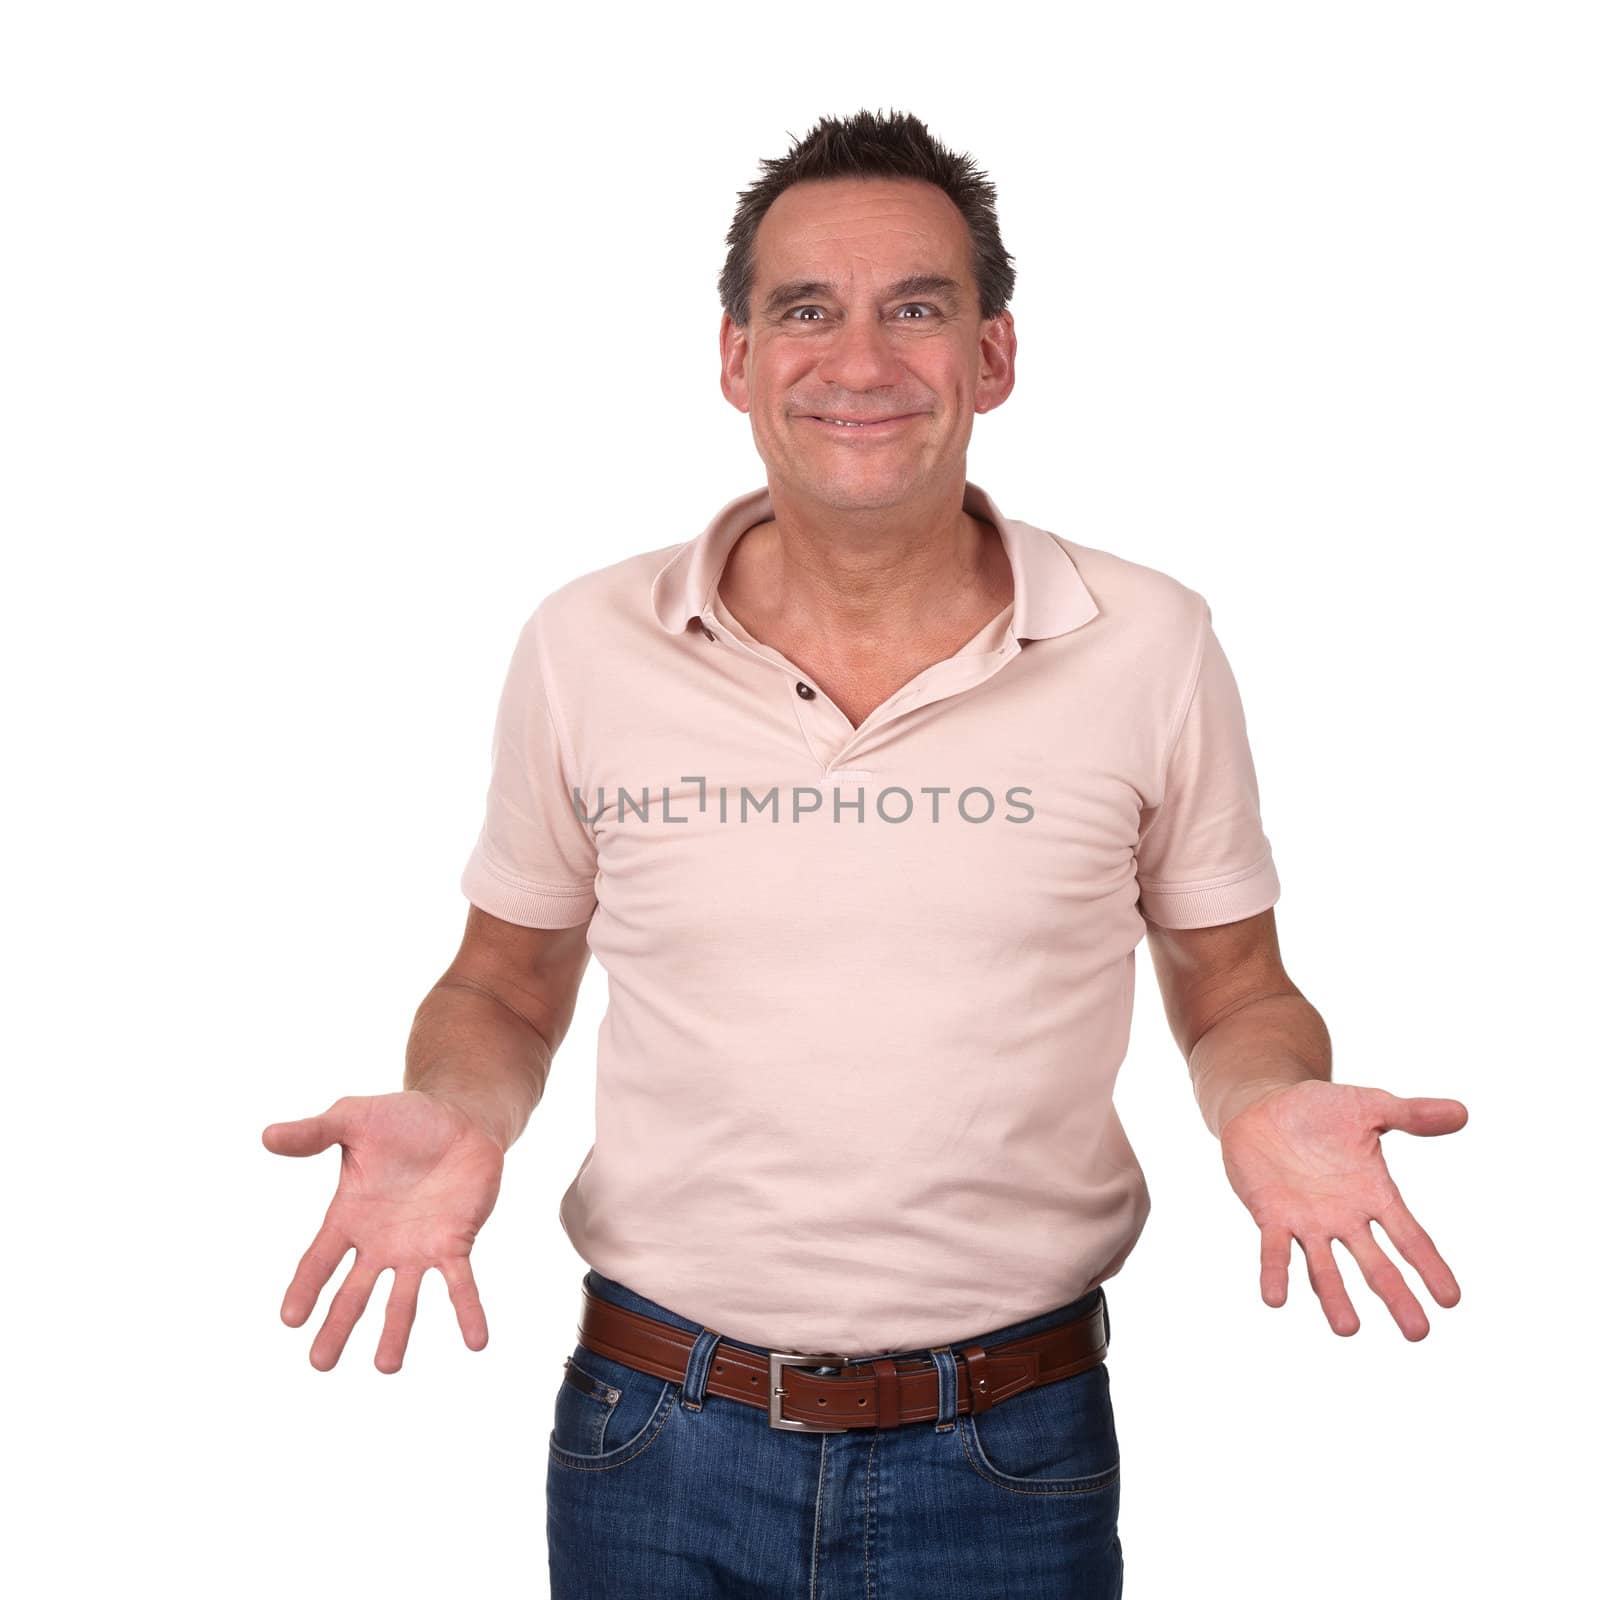 Attractive Smiling Middle Age Man with Cheesy Grin Holding Hands Forward Isolated